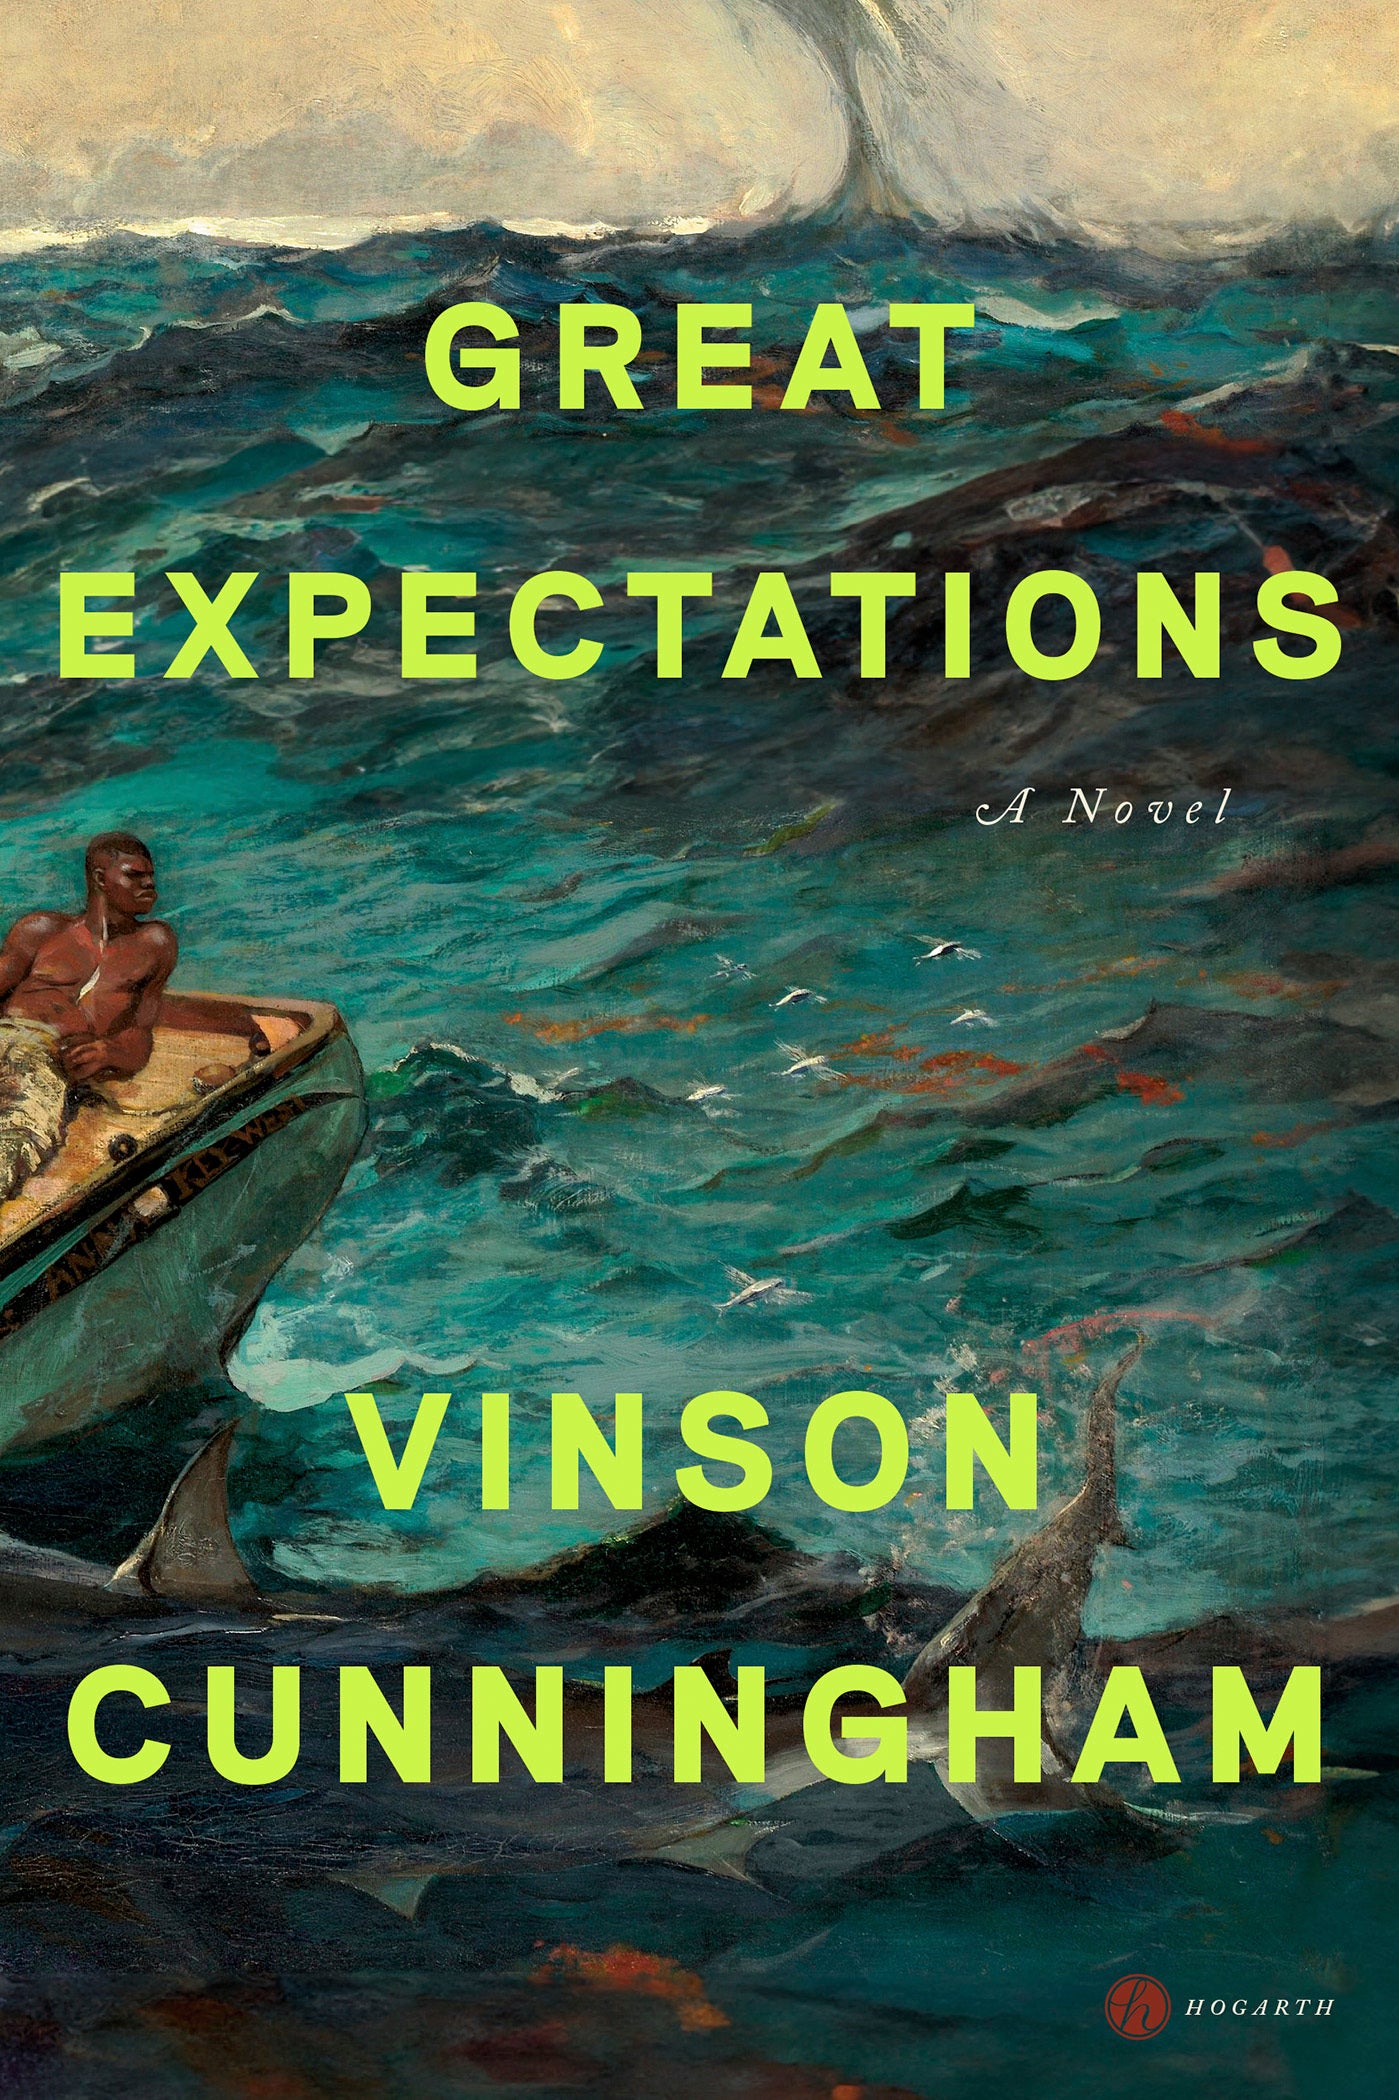 Book Review - Great Expectations